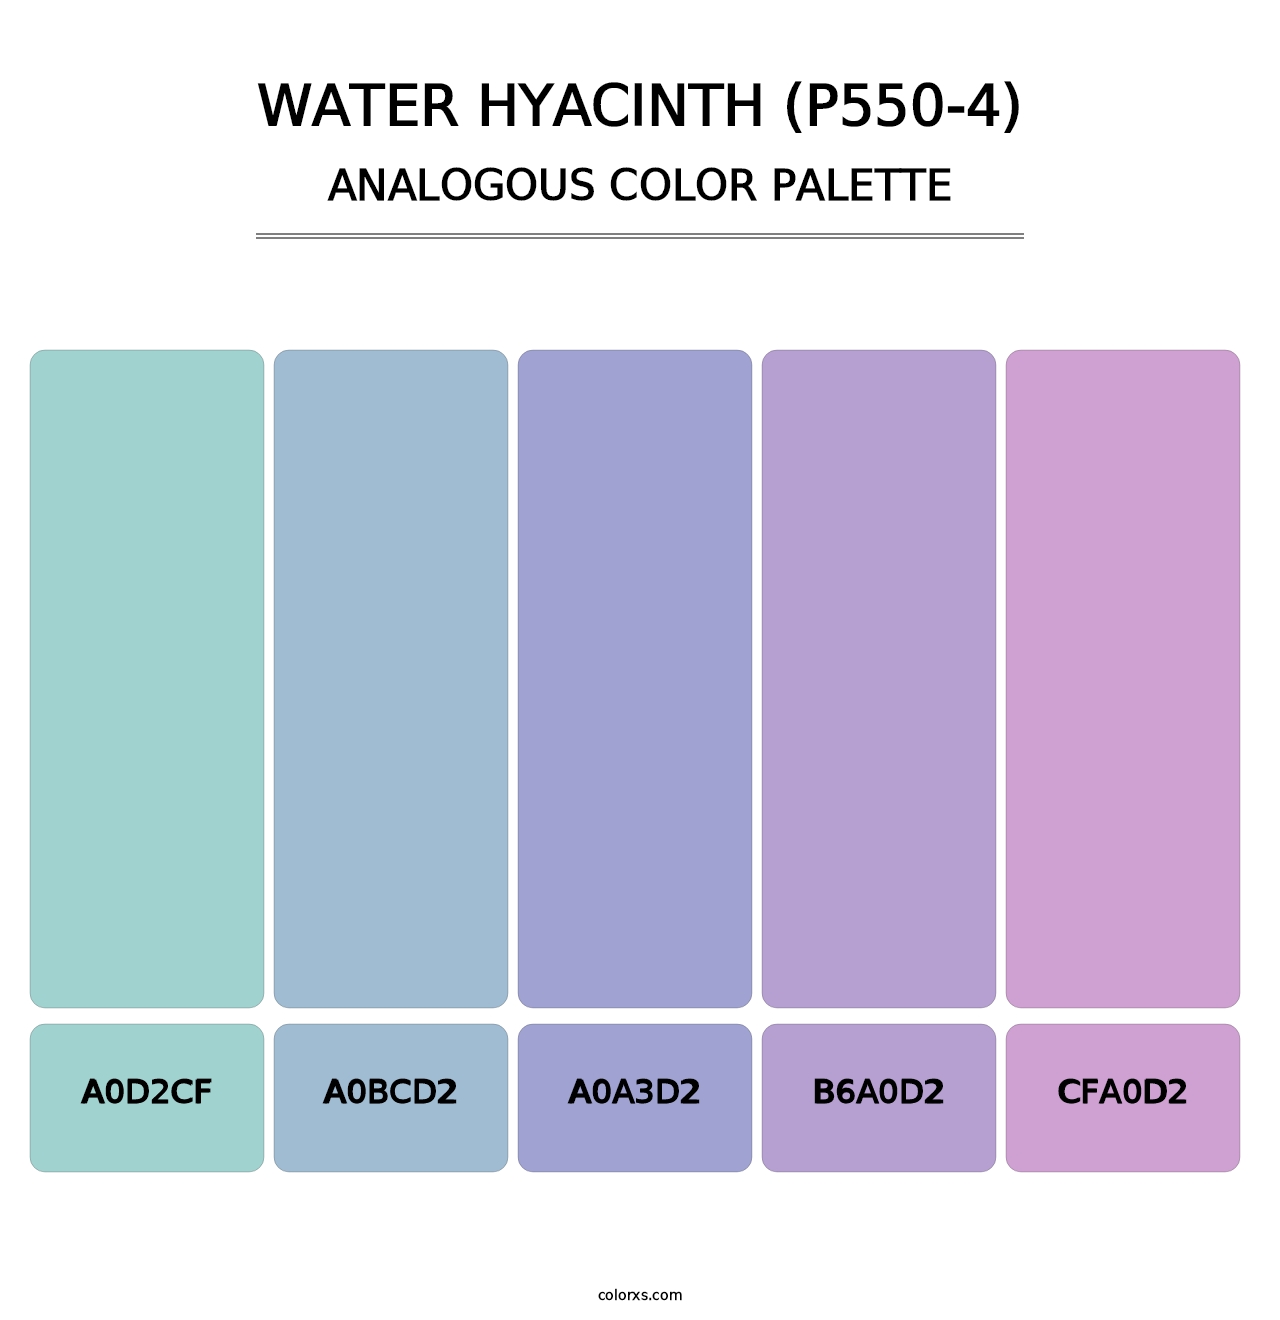 Water Hyacinth (P550-4) - Analogous Color Palette